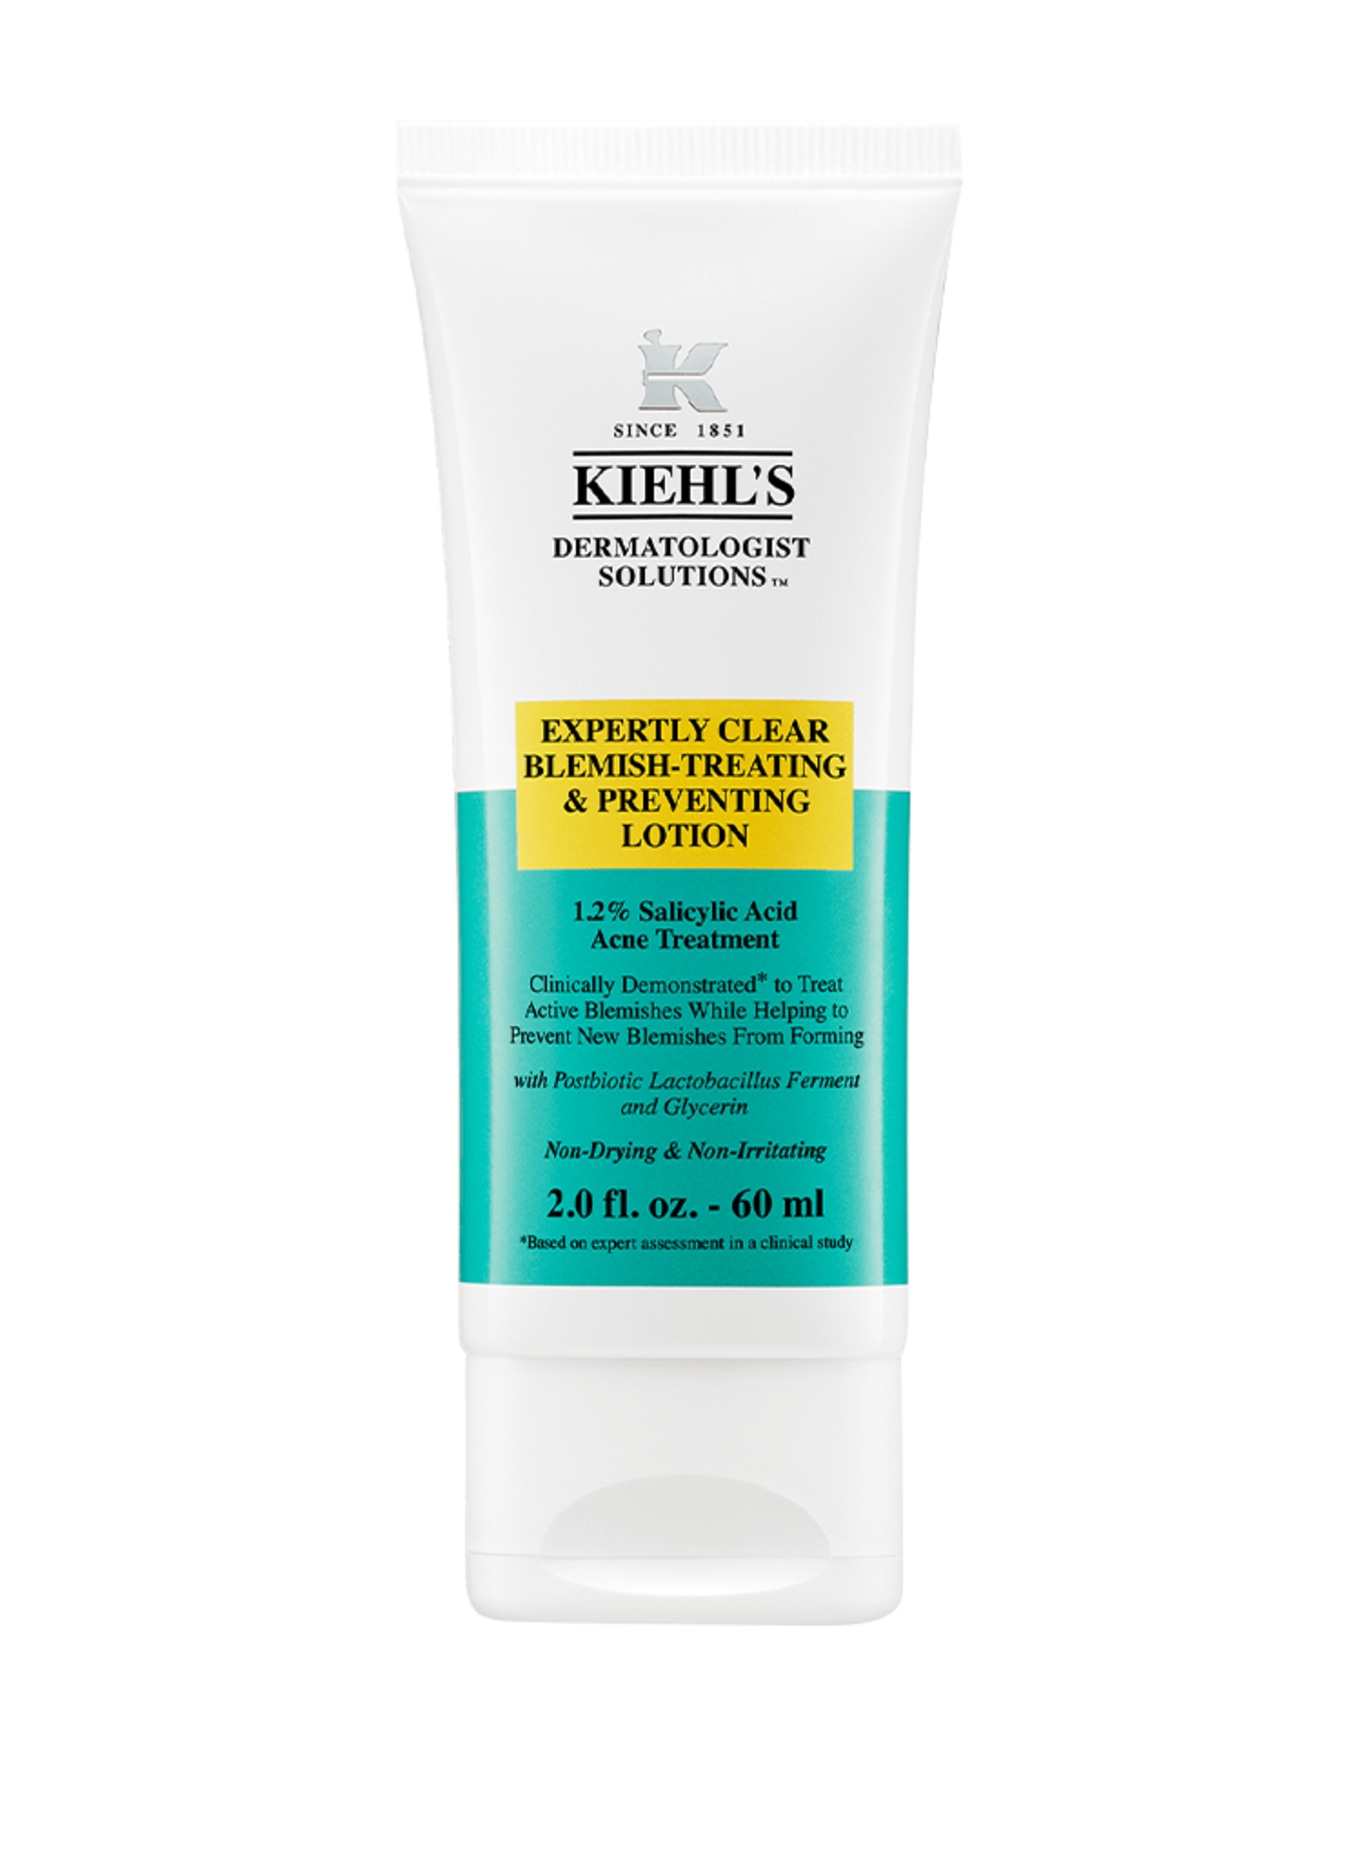 Kiehl's EXPERTLY CLEAR BLEMISH TREATING & PREVENTING LOTION (Obrázek 1)